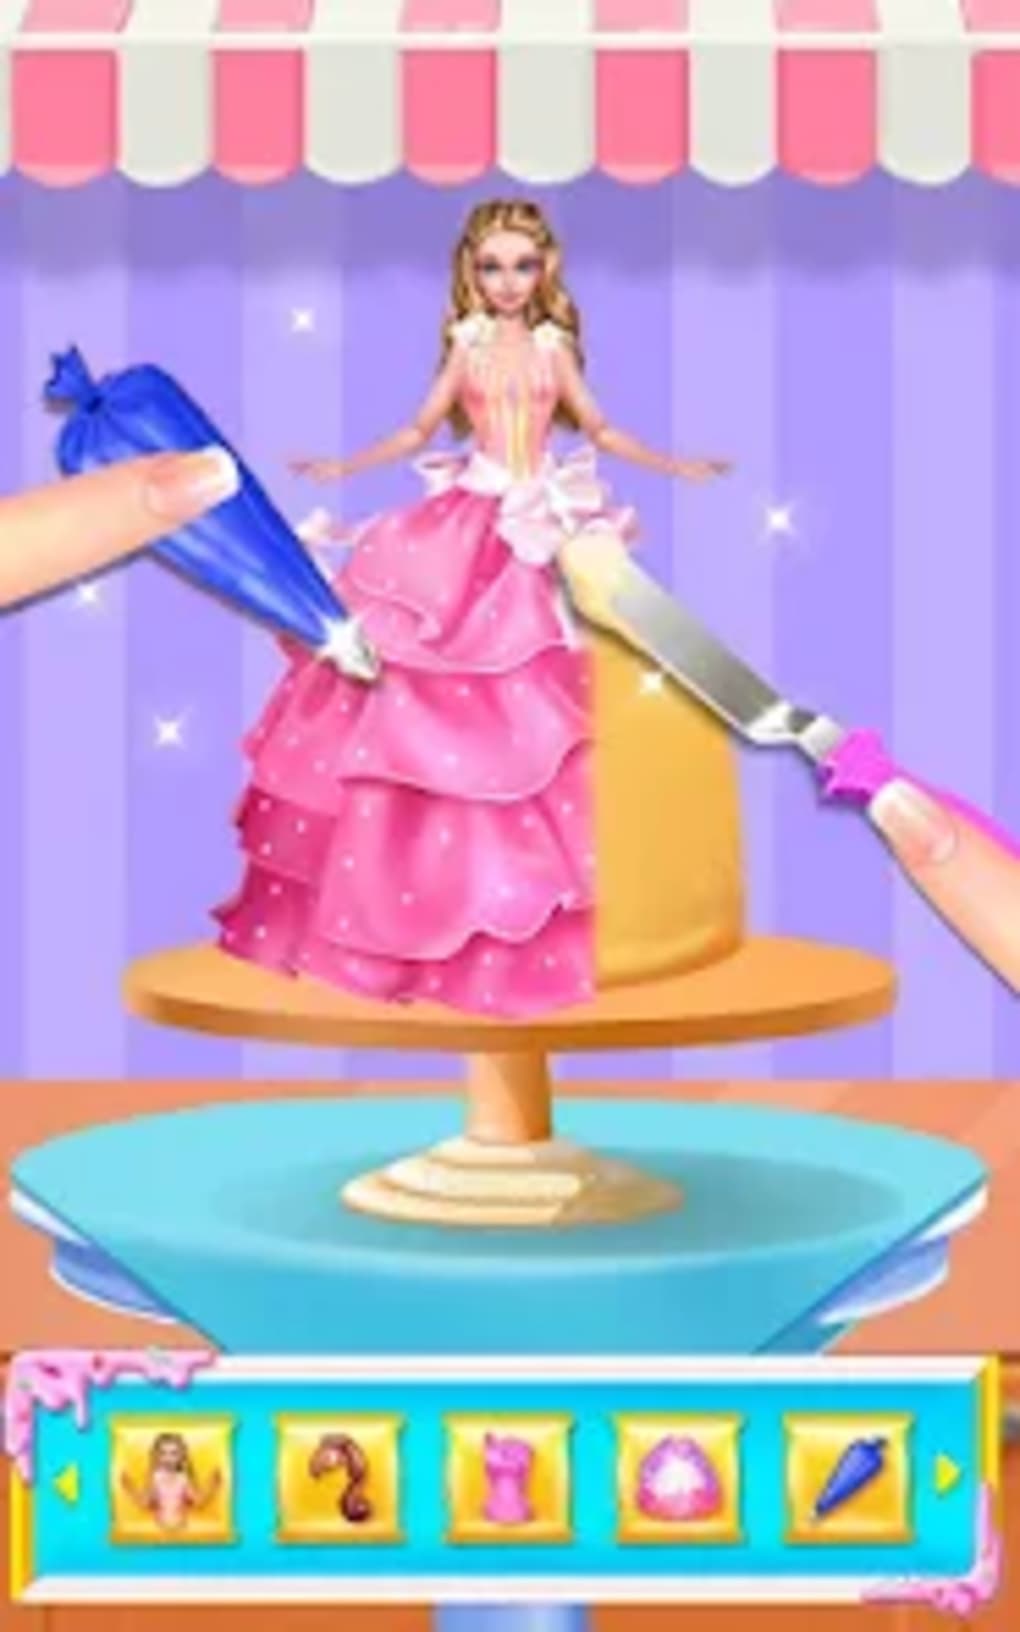 Icing On Doll Cake - Cooking Games - Baby Games Videos - YouTube